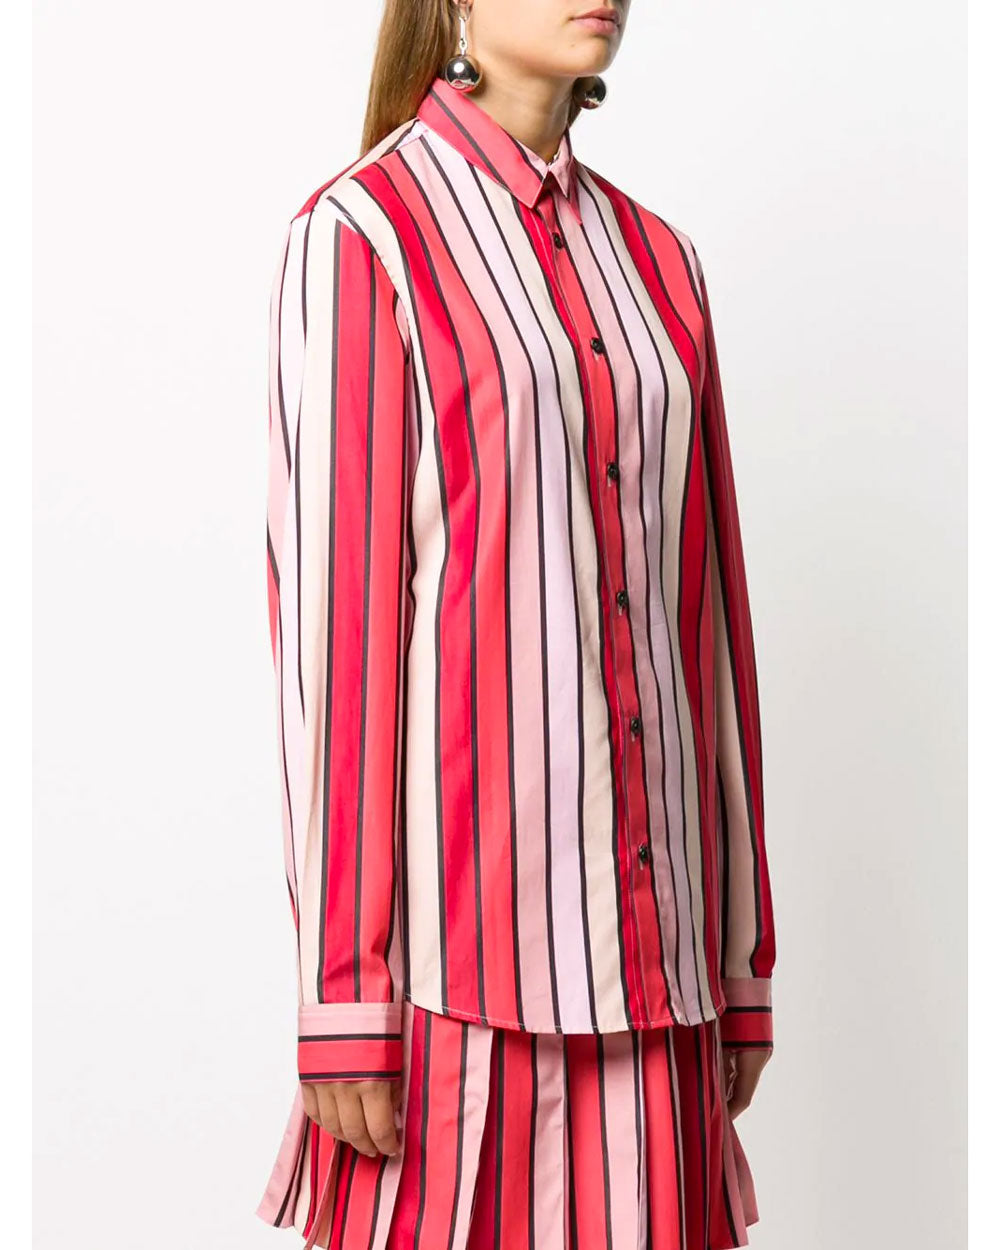 Red and Pink Striped Tailored Shirt